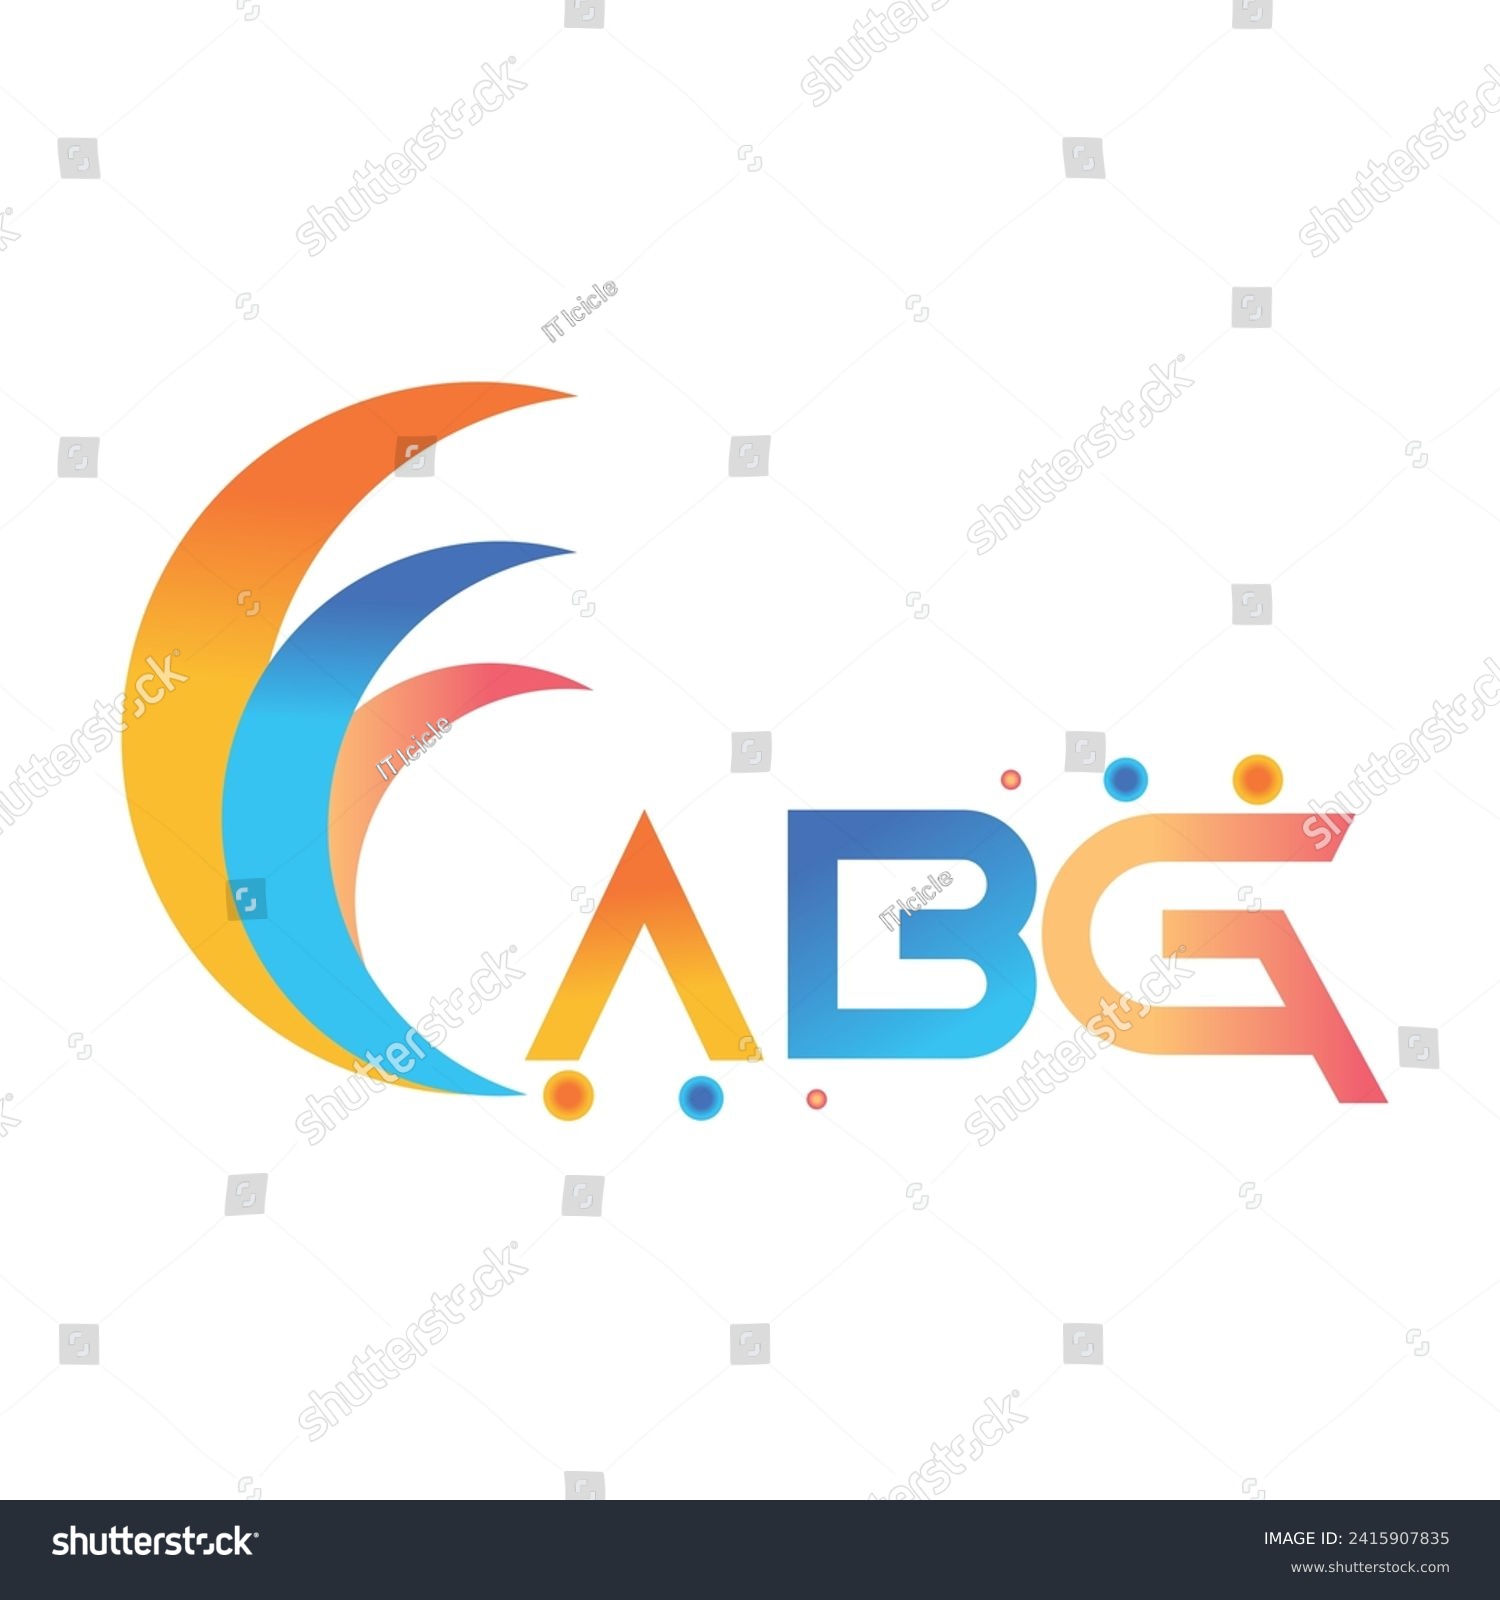 SVG of ABG letter technology logo design on white background. ABG creative initials letter business logo concept. ABG uppercase monogram logo and typography for technology, business and real estate brand.
 svg